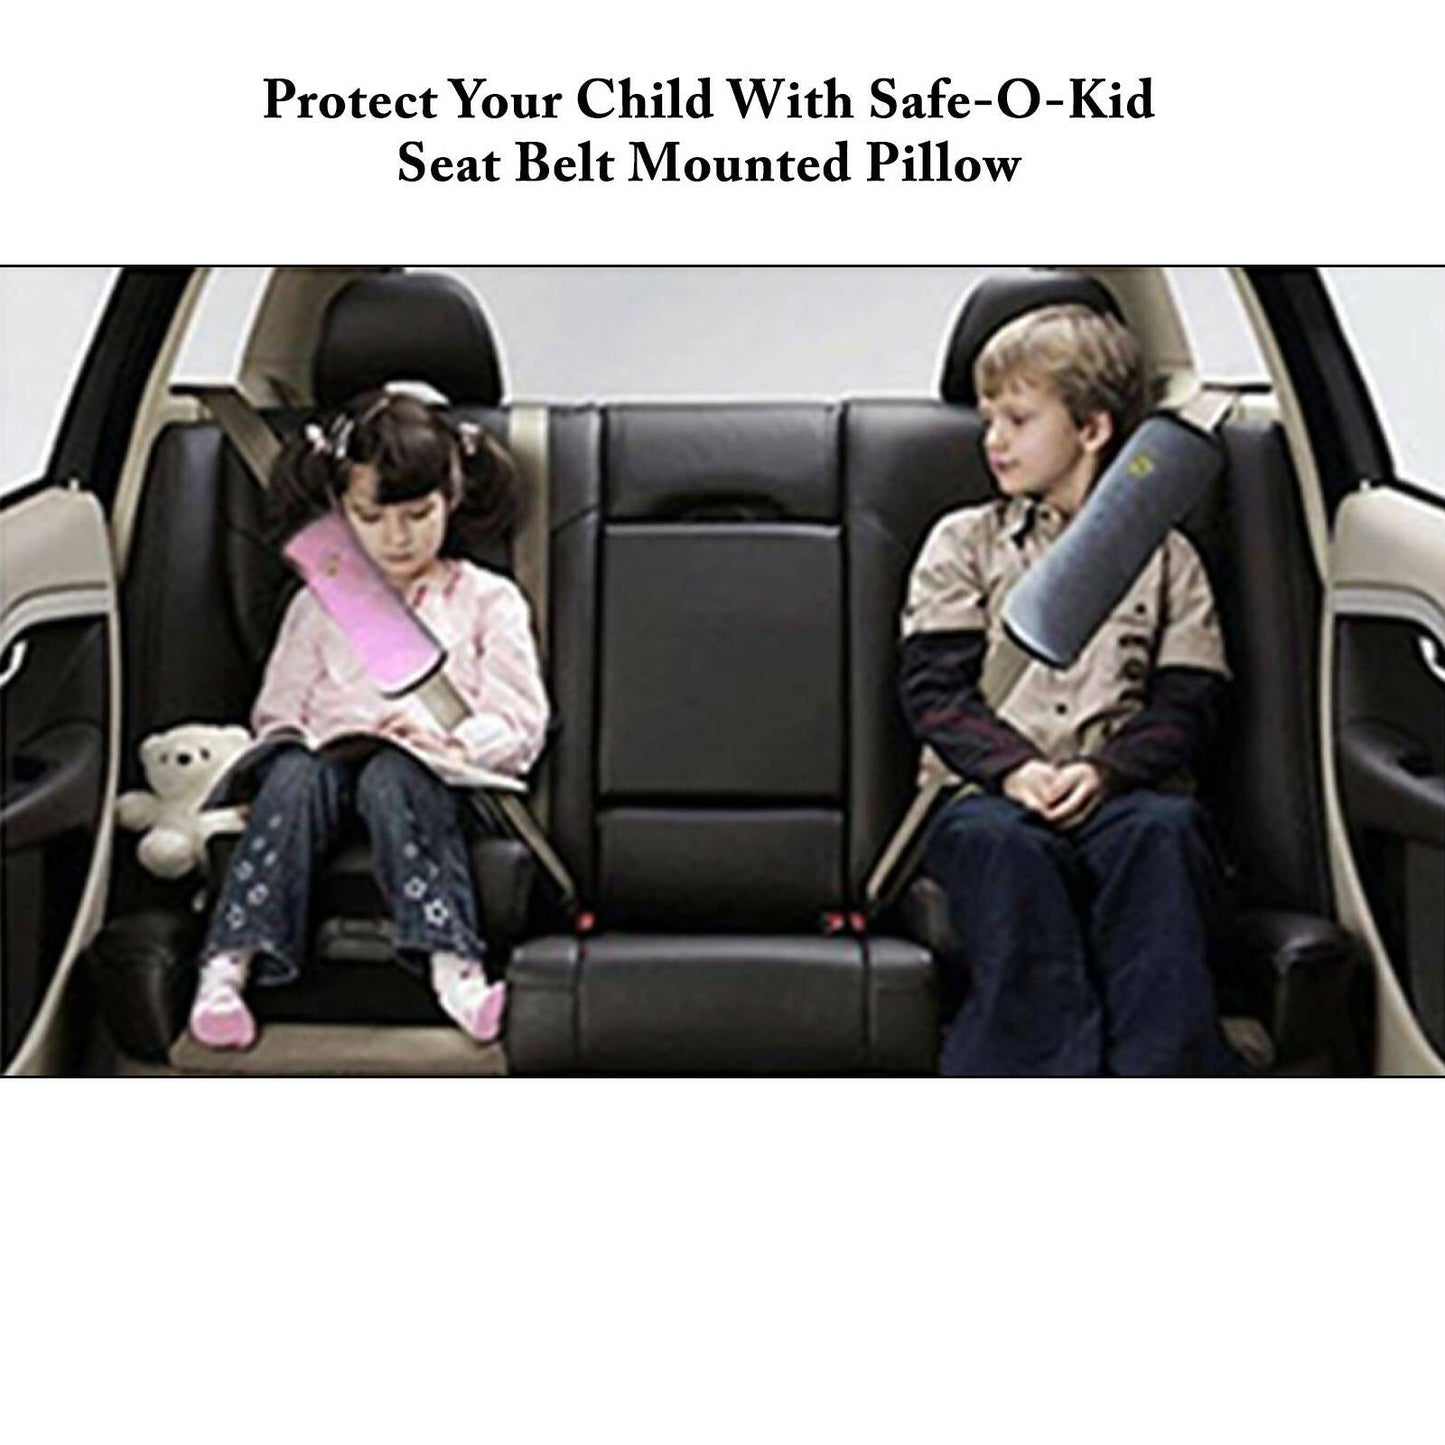 Safe-O-Kid Car Safety Cushioned seat Belt Strap for Toddlers